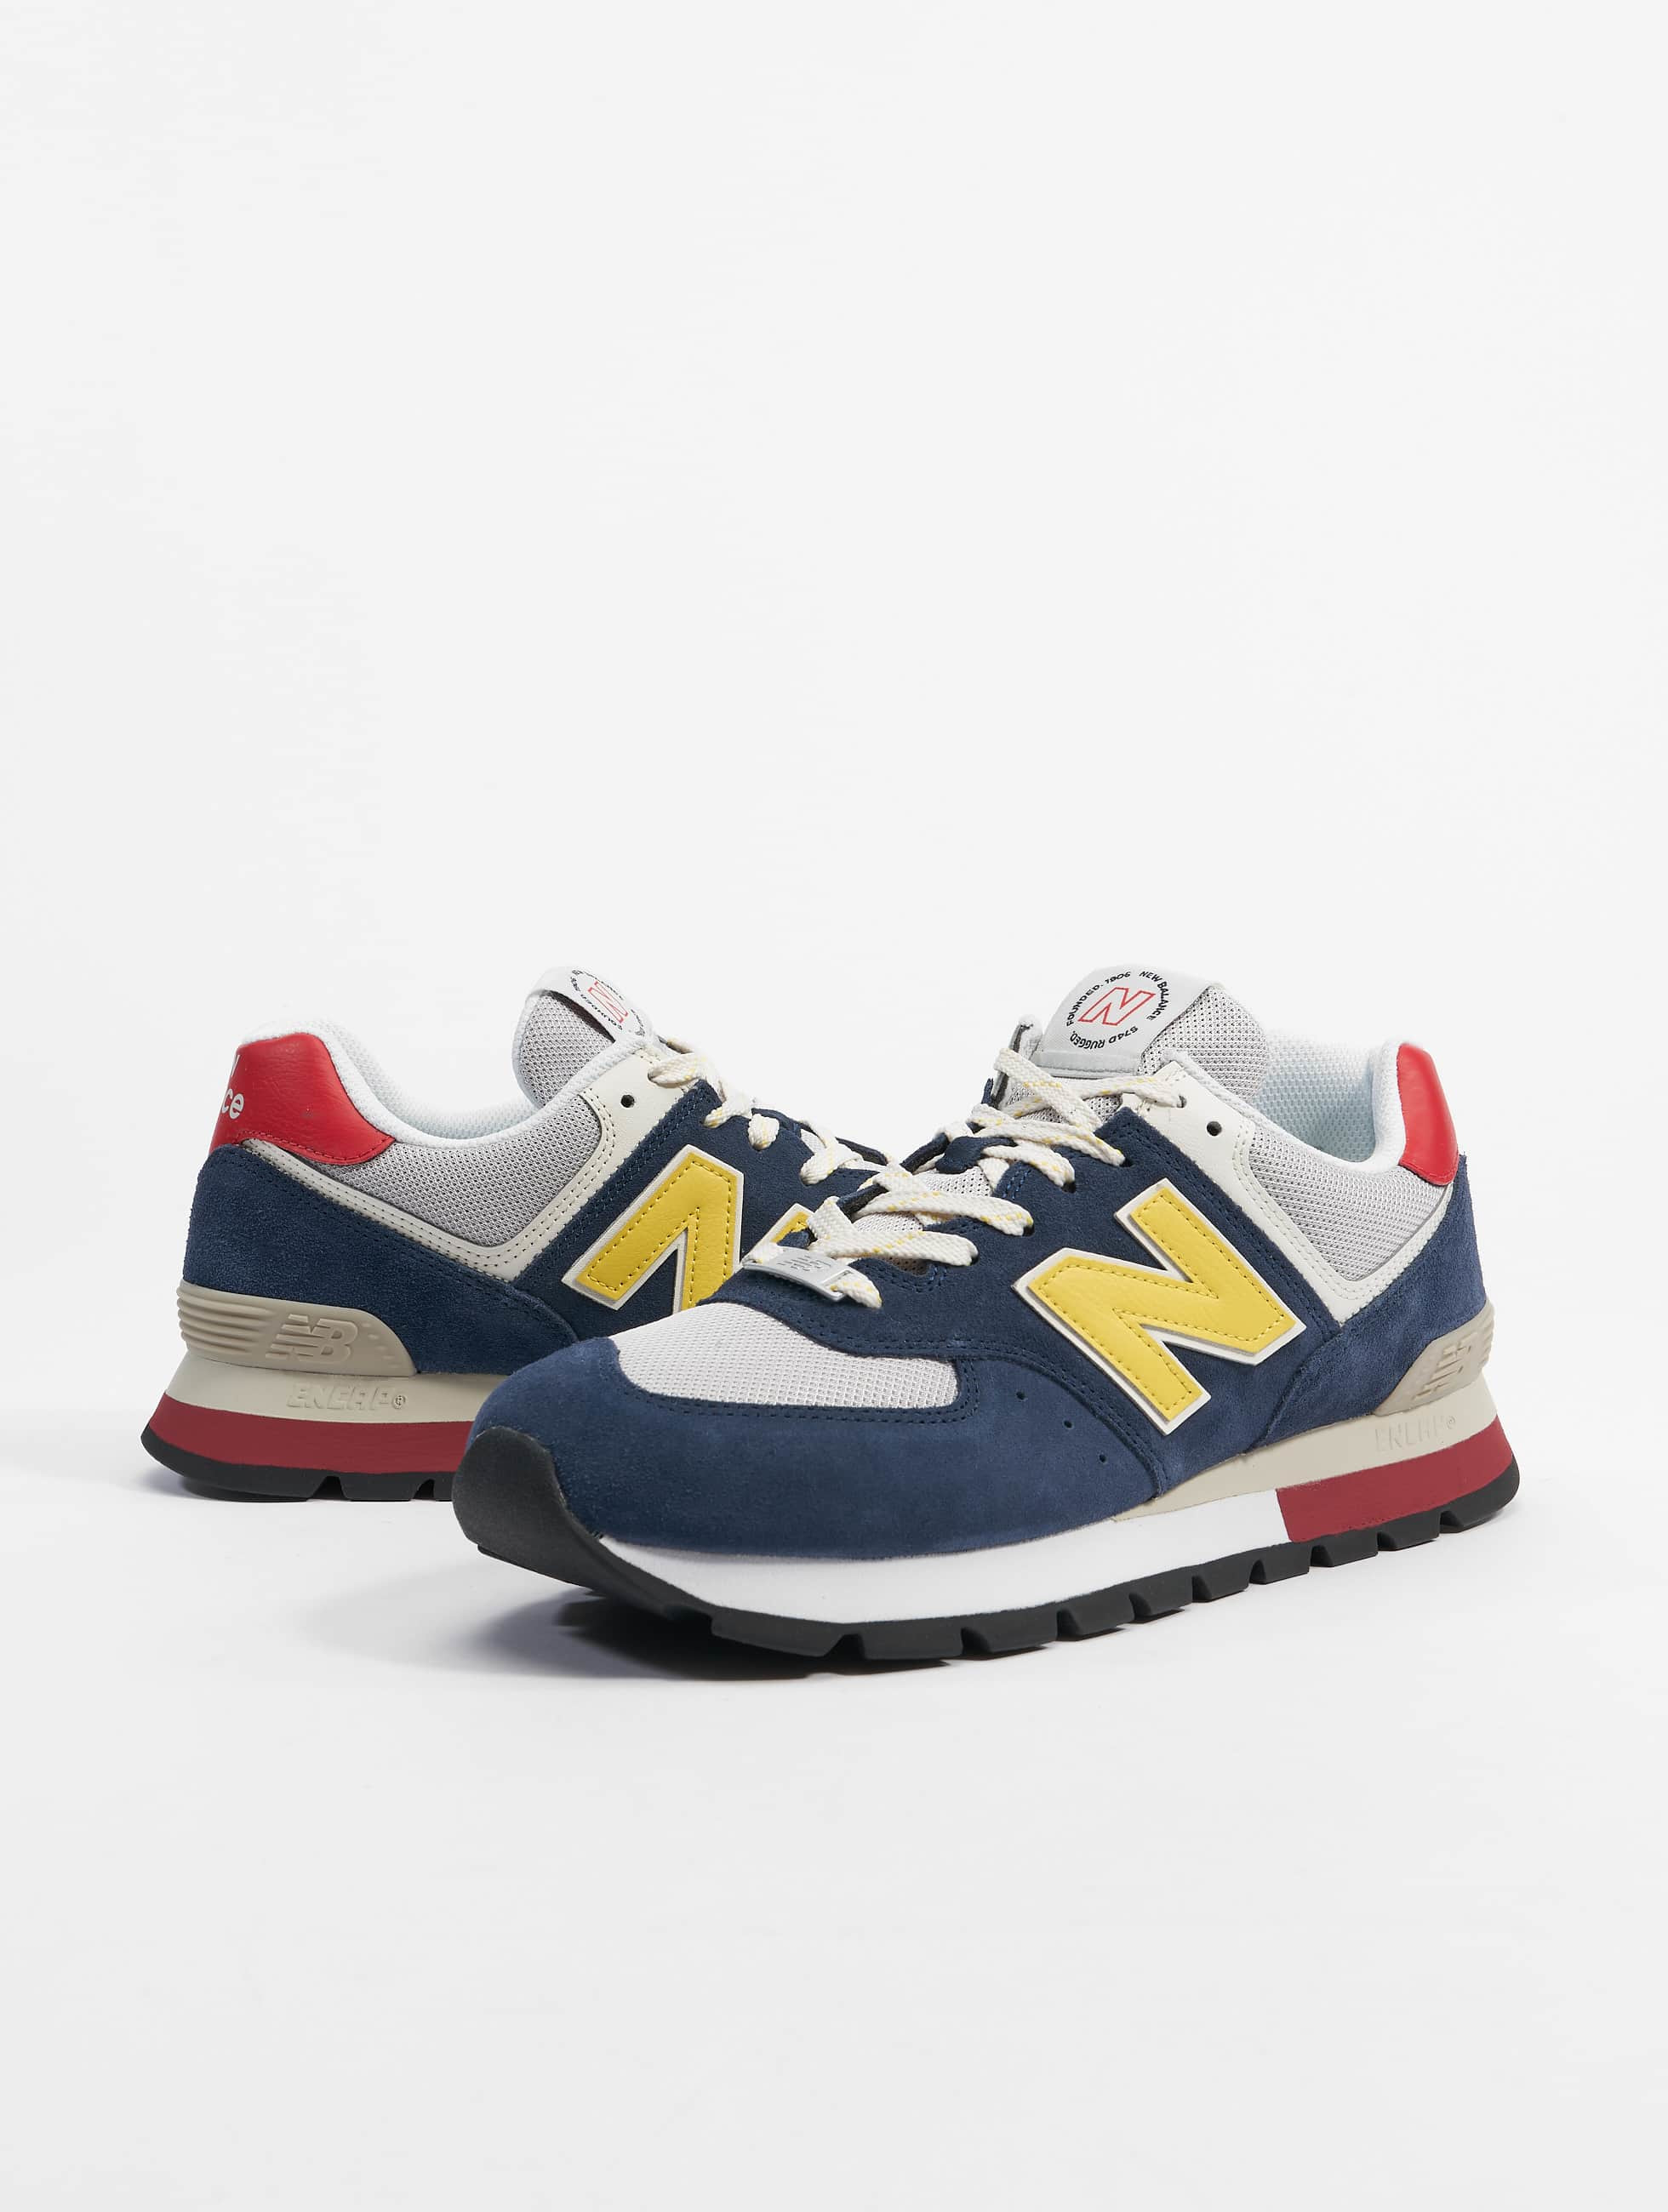 Parche marzo Riego New Balance Shoe / Sneakers 574 in blue 977309